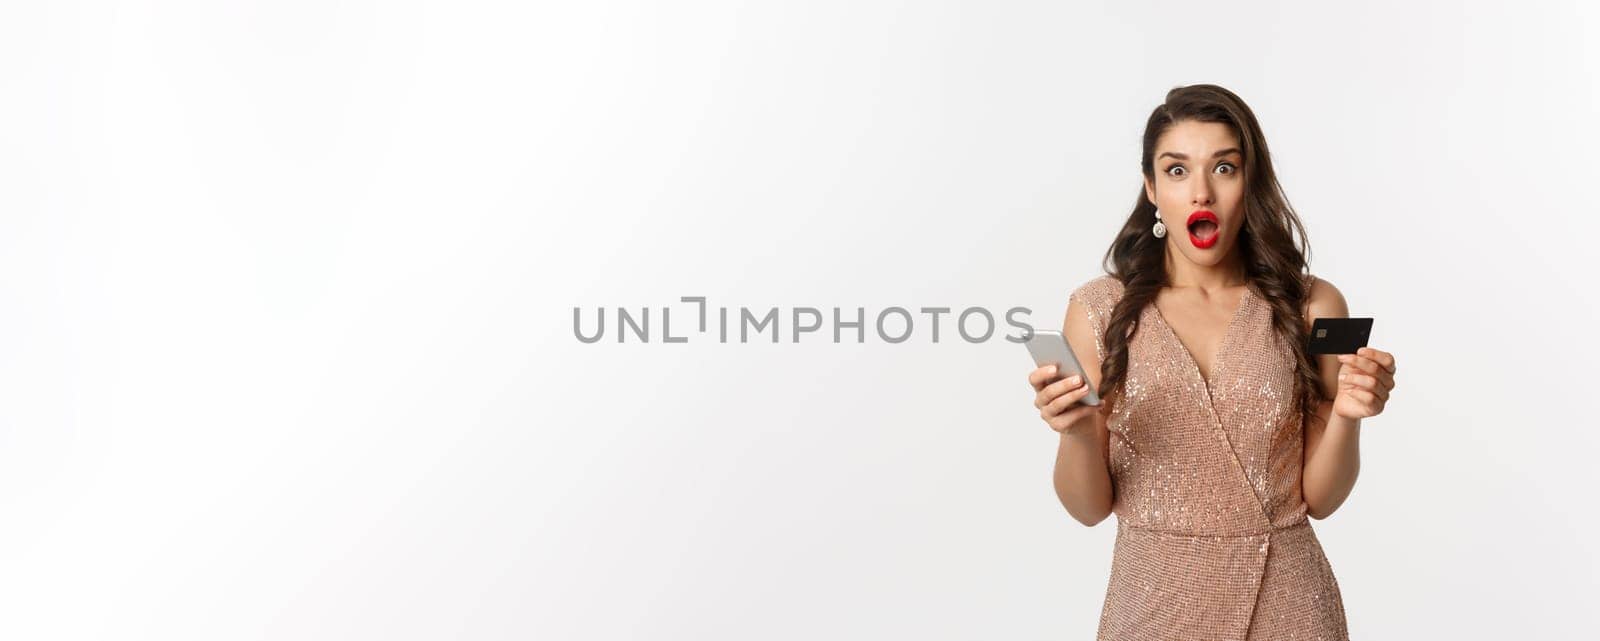 Online shopping and holidays concept. Surprised woman in glamour dress, buying in internet with credit card and mobile phone, looking amazed, white background.